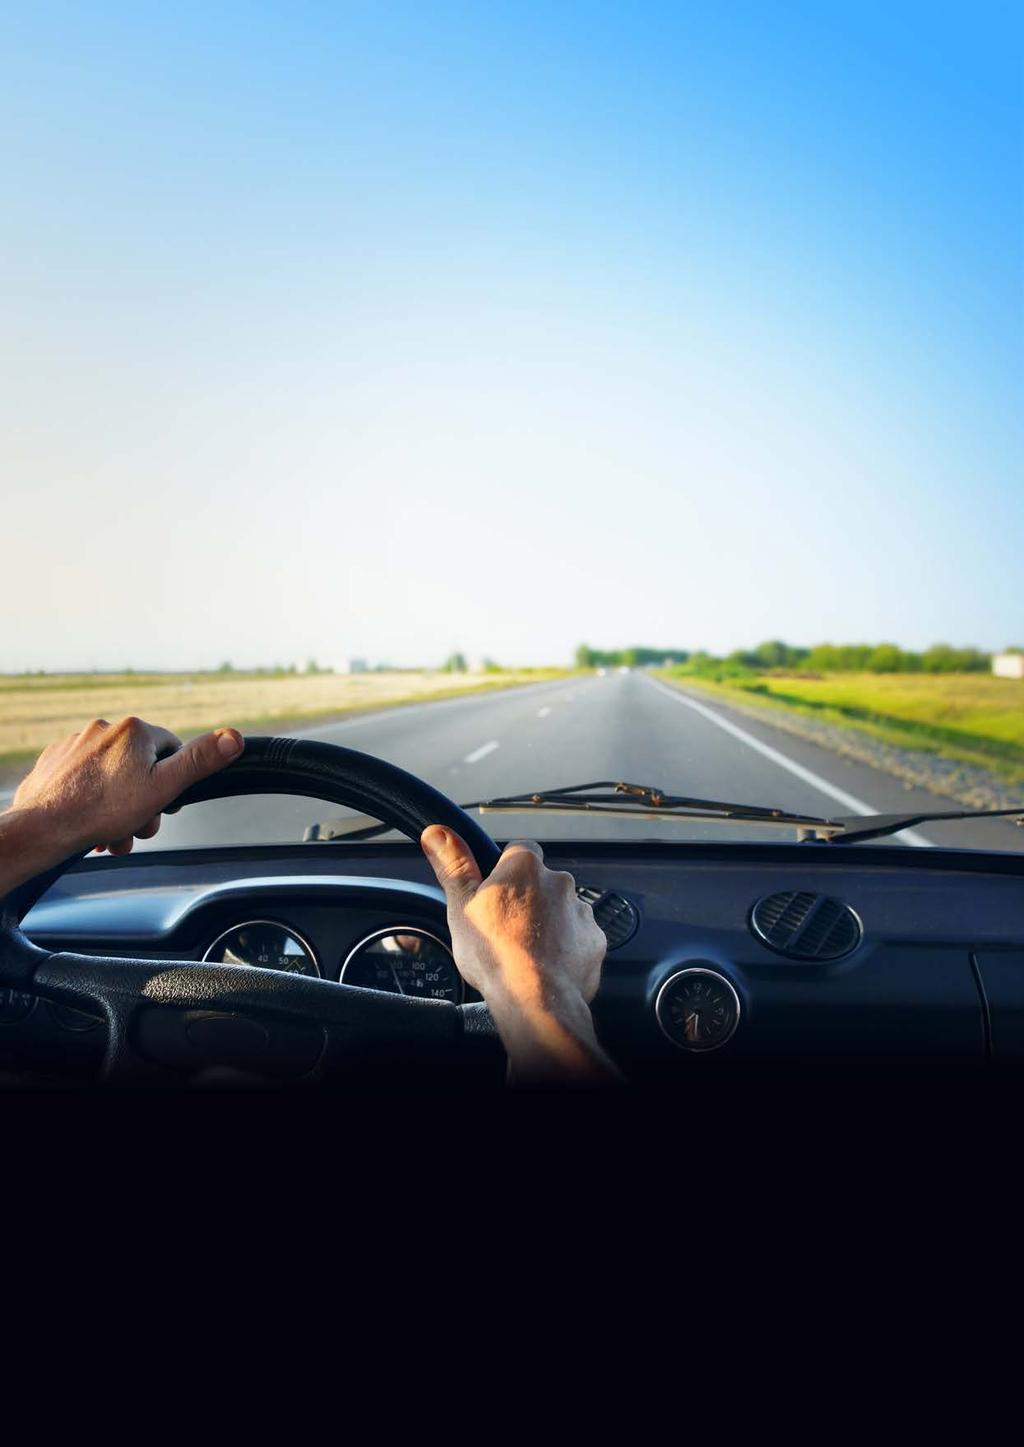 DRIVER BEHAVIOR AND SAFETY How can I coach drivers to be safer using real-life examples? As a fleet manager, driver safety is high on your list of priorities.